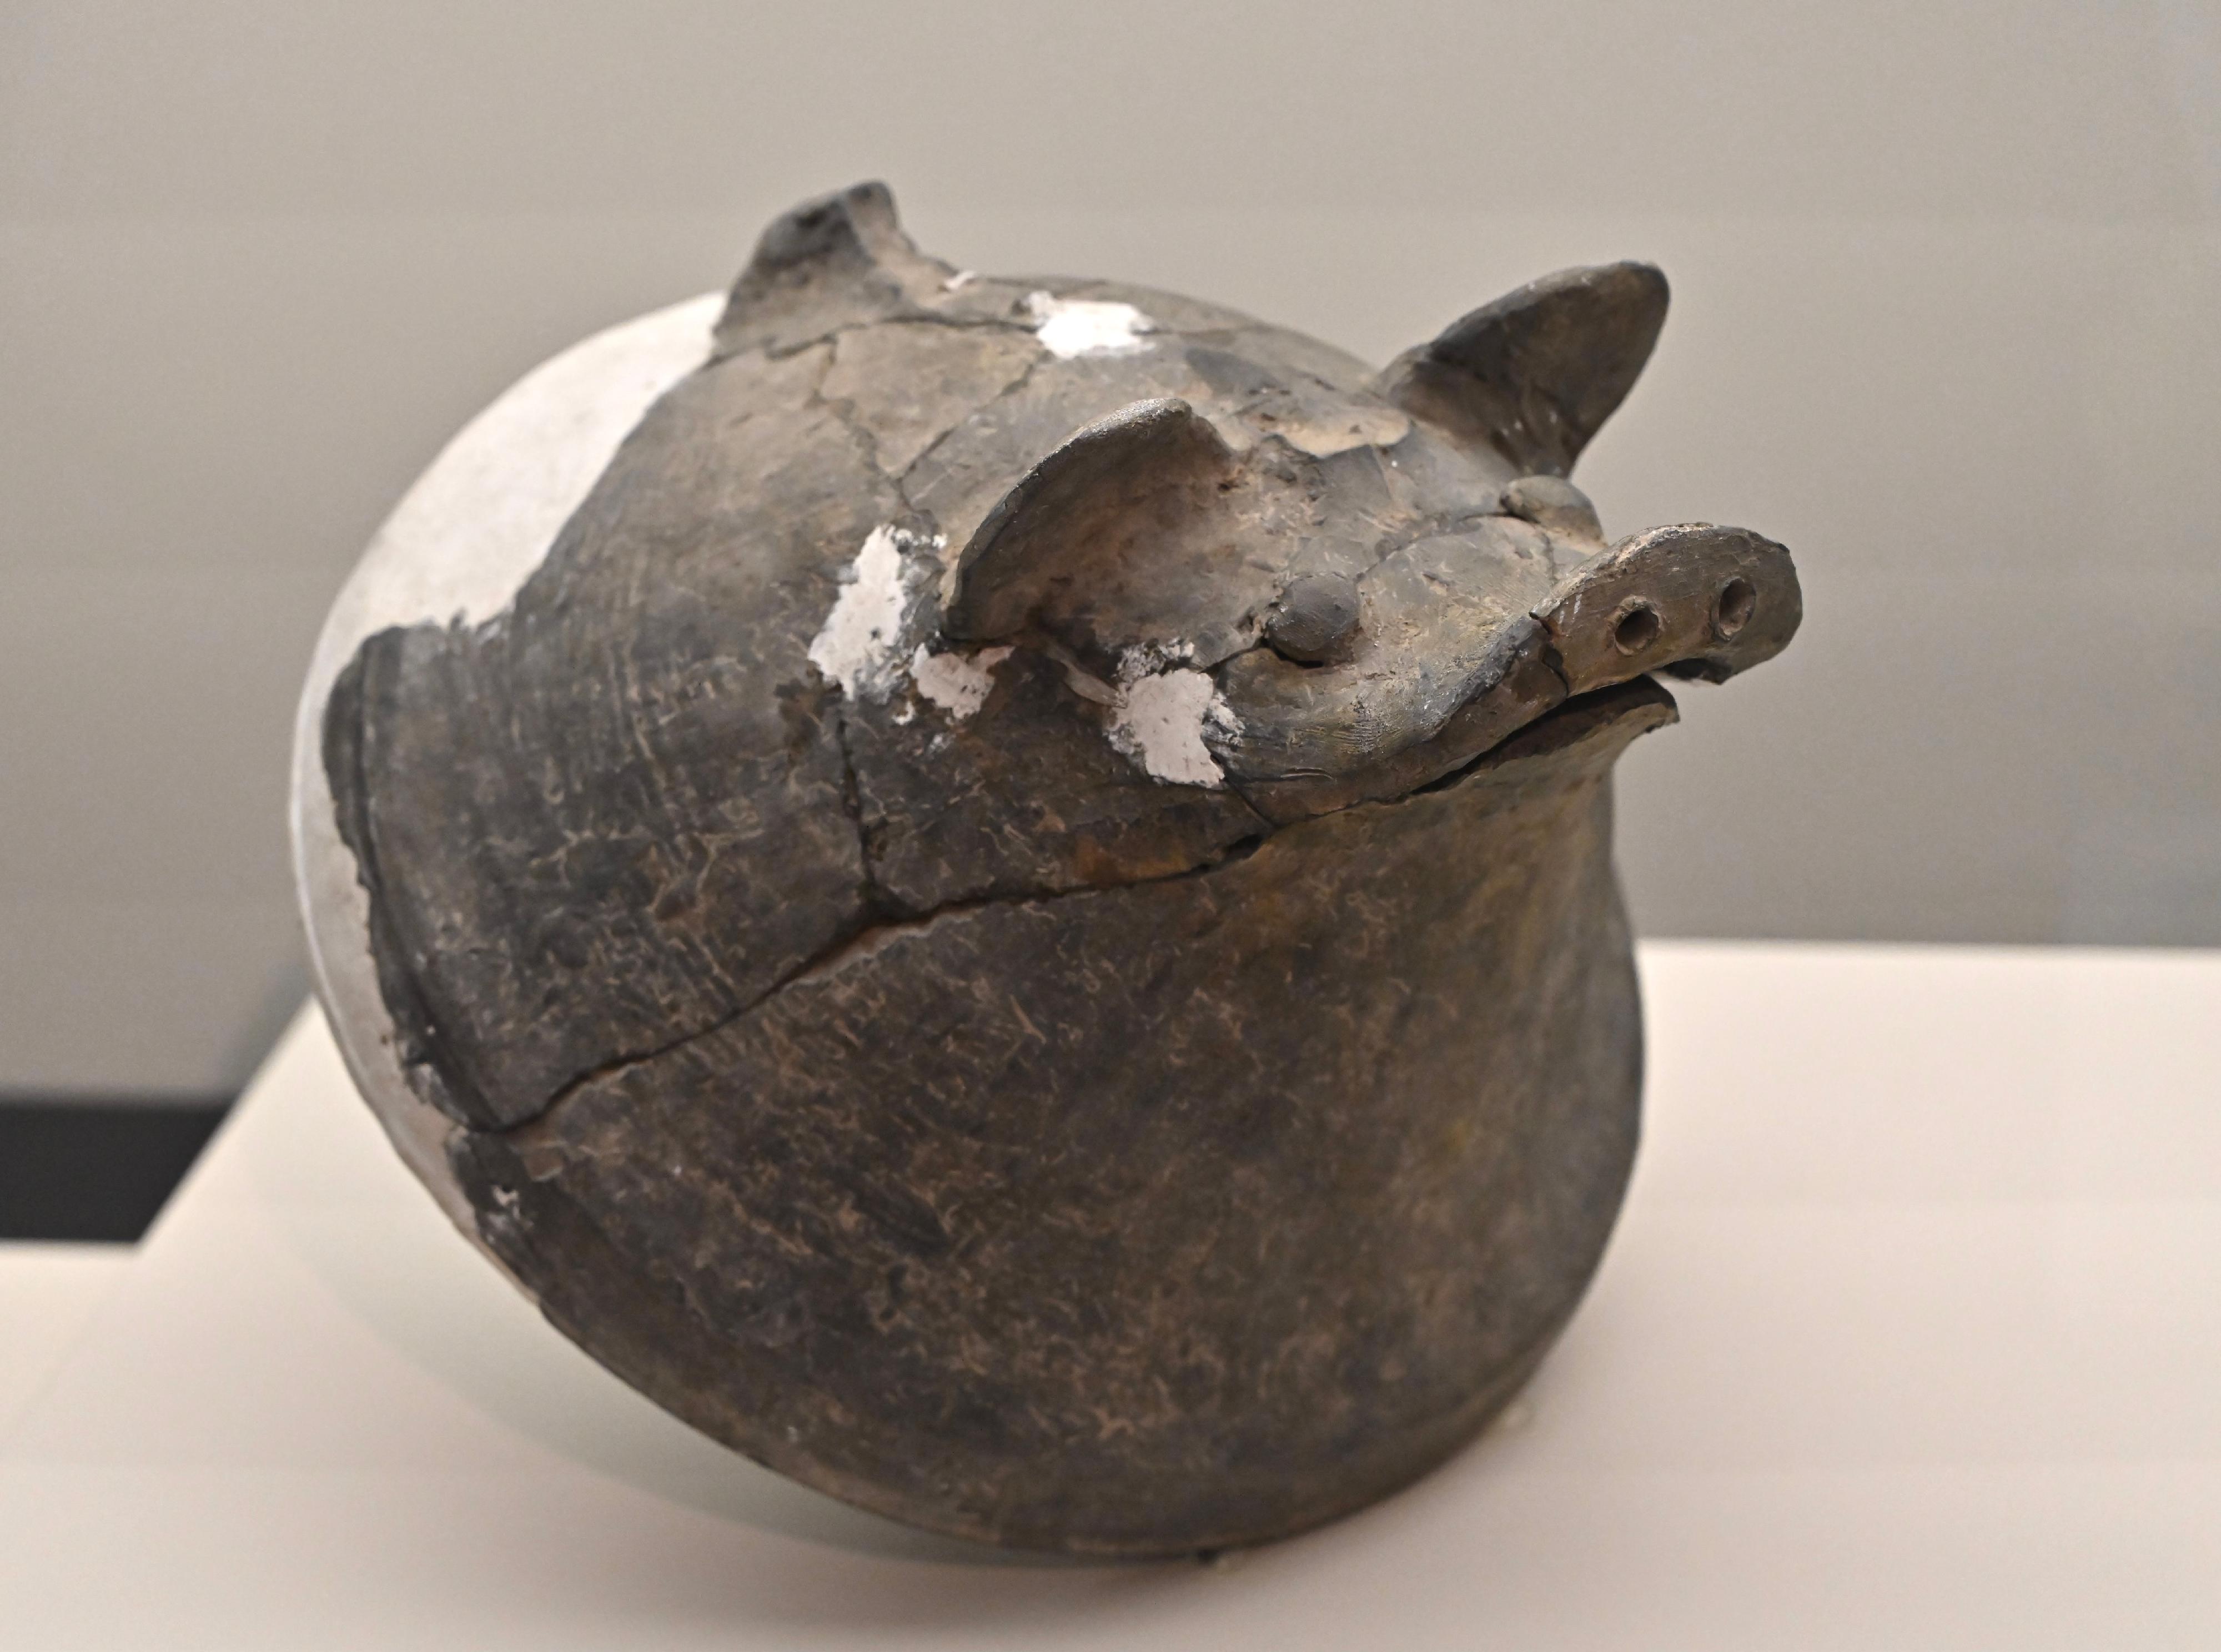 The Hong Kong Museum of History’s "The Hong Kong Jockey Club Series: The Ancient Civilisation of the Xia, Shang and Zhou Dynasties in Henan Province" exhibition will be open to the public from tomorrow (April 3). Photo shows a boar-head-shaped lid of a pottery vessel from the Xia dynasty from a collection of Zhengzhou Municipal Institute of Archaeology, unearthed from the Xinzhai site in Xinmi. 